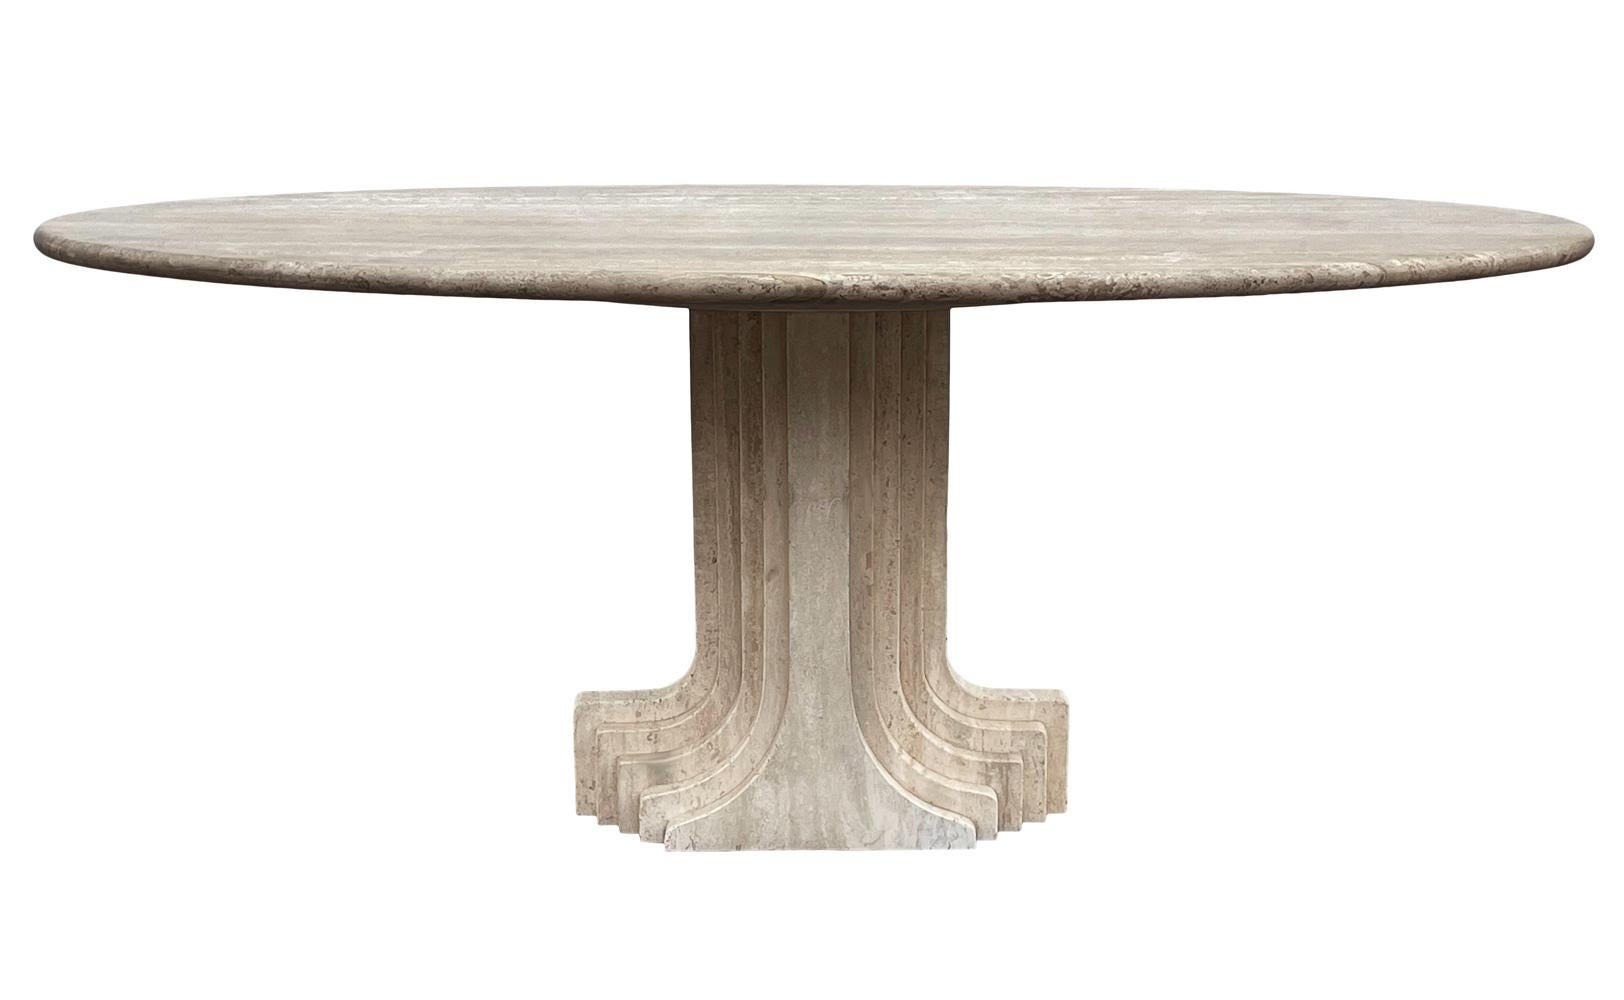 A stunning design oval dining table by Carlo Scarpa and produced by Simon Gavina in Italy circa 1975. It features beautiful solid cream colored travertine construction. Well cared for without any condition issues.